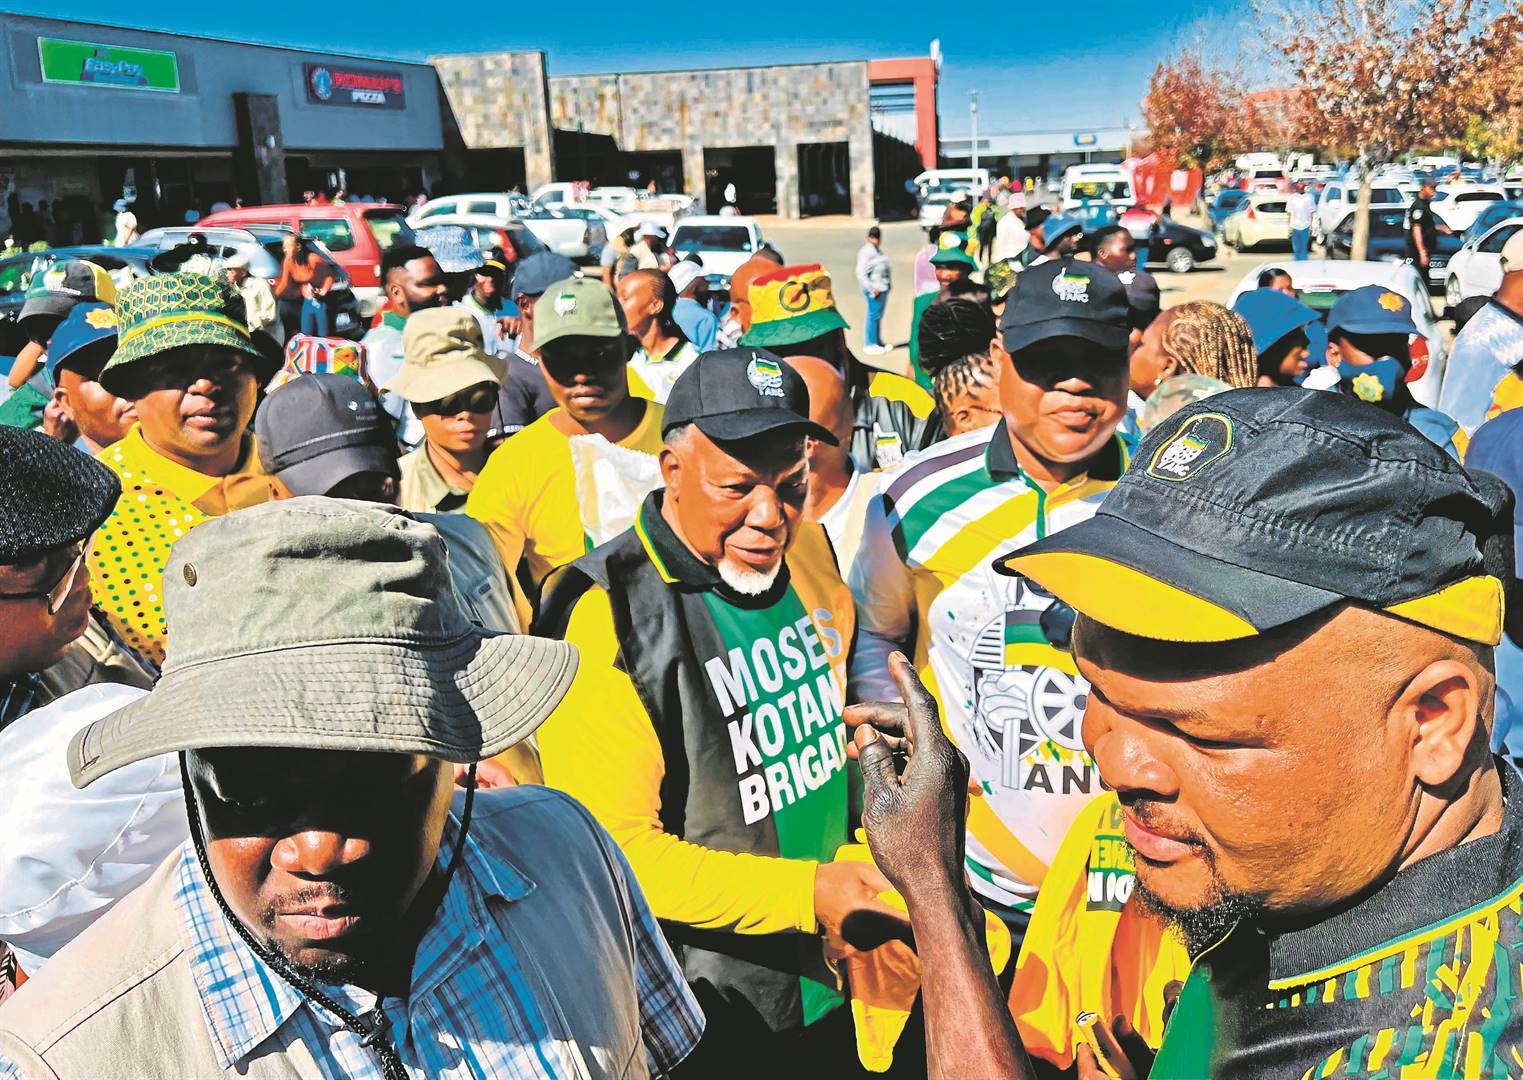 Former deputy president Kgalema Motlanthe meeting and greeting as he gives away ANC T-shirts during his election campaign in Tsakane, Ekurhuleni